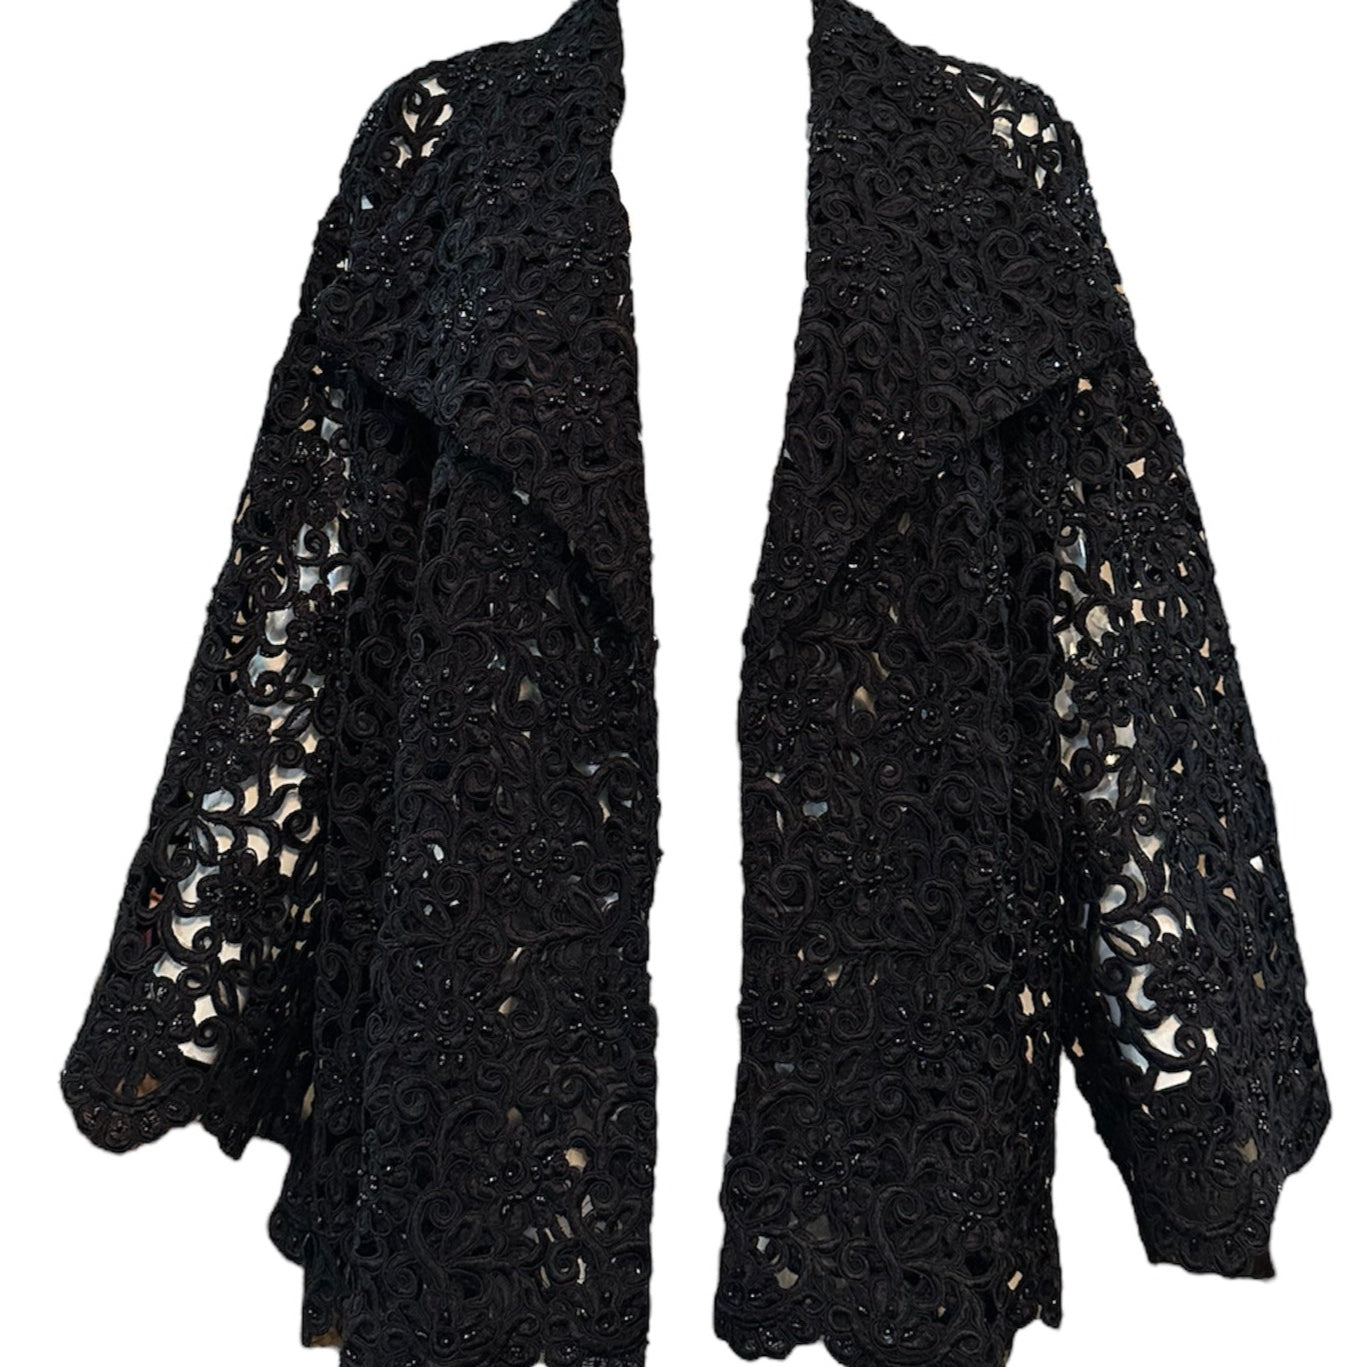 Gorgeous Black Cutwork Lace Evening Jacket Dotted with Beading ALTERNATIVE OPENING 2 of 6